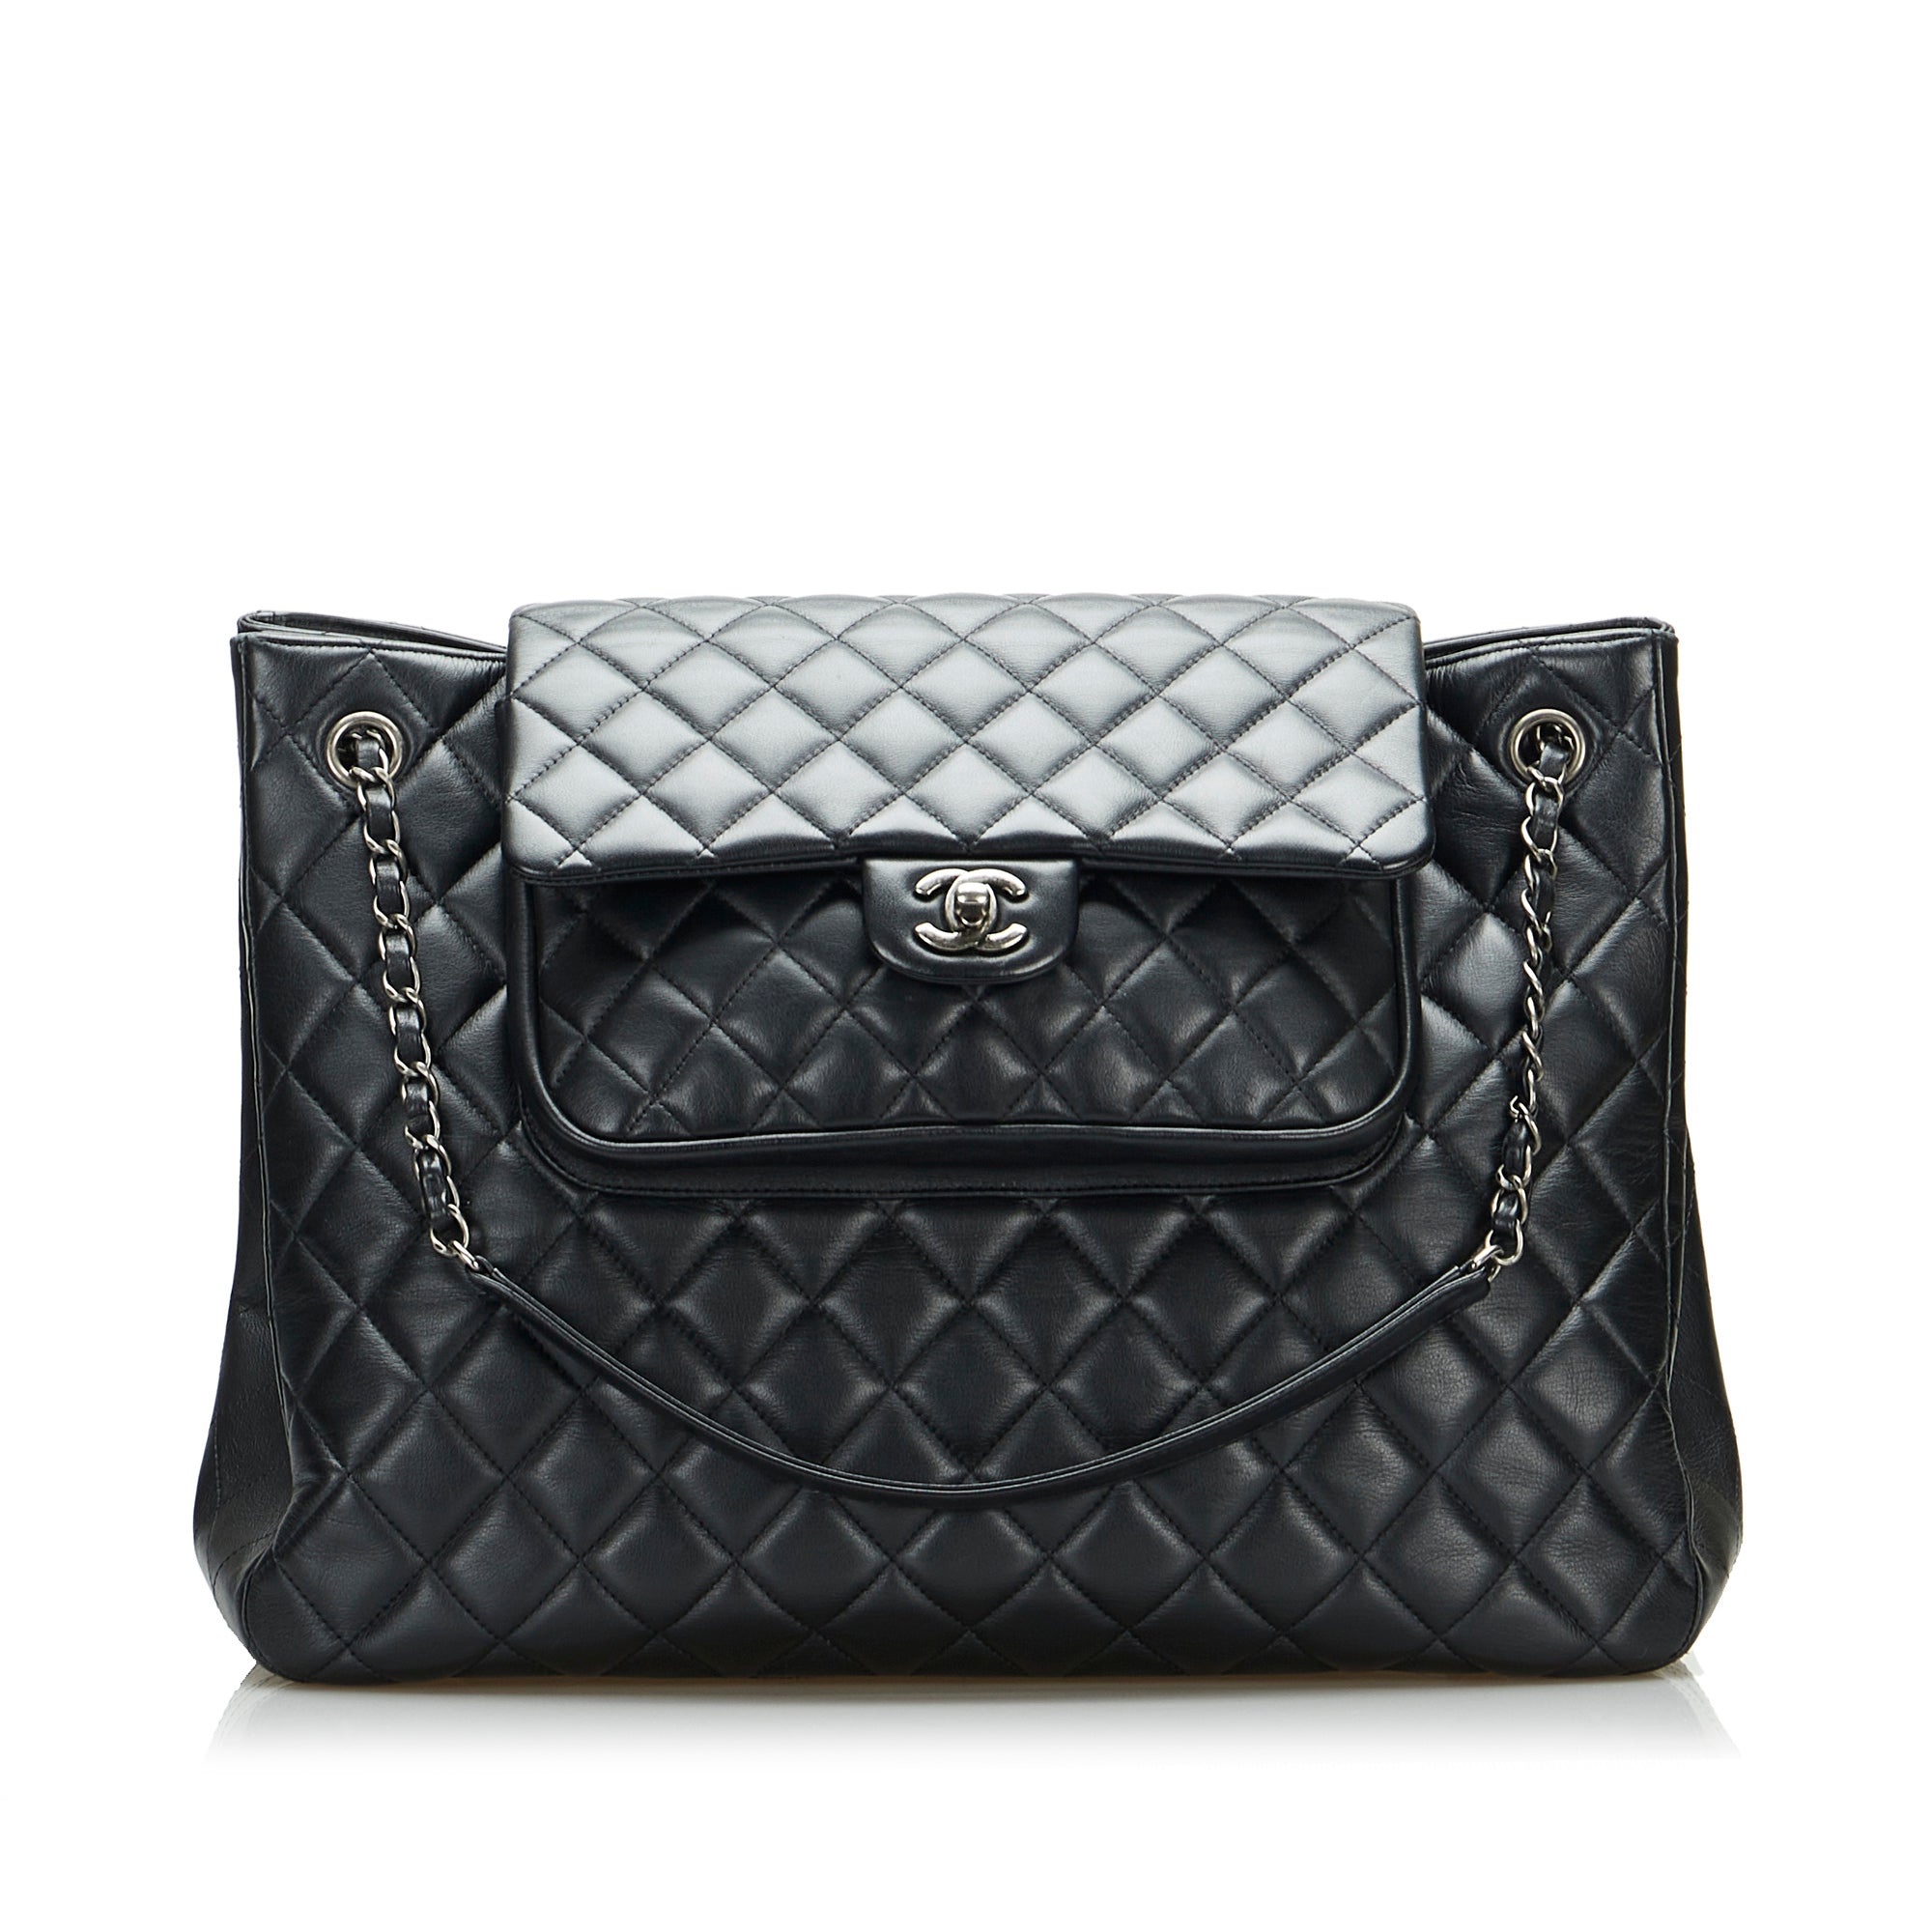 CHANEL, Bags, Chanel Large Ligne Cambon Flap Tote Bag